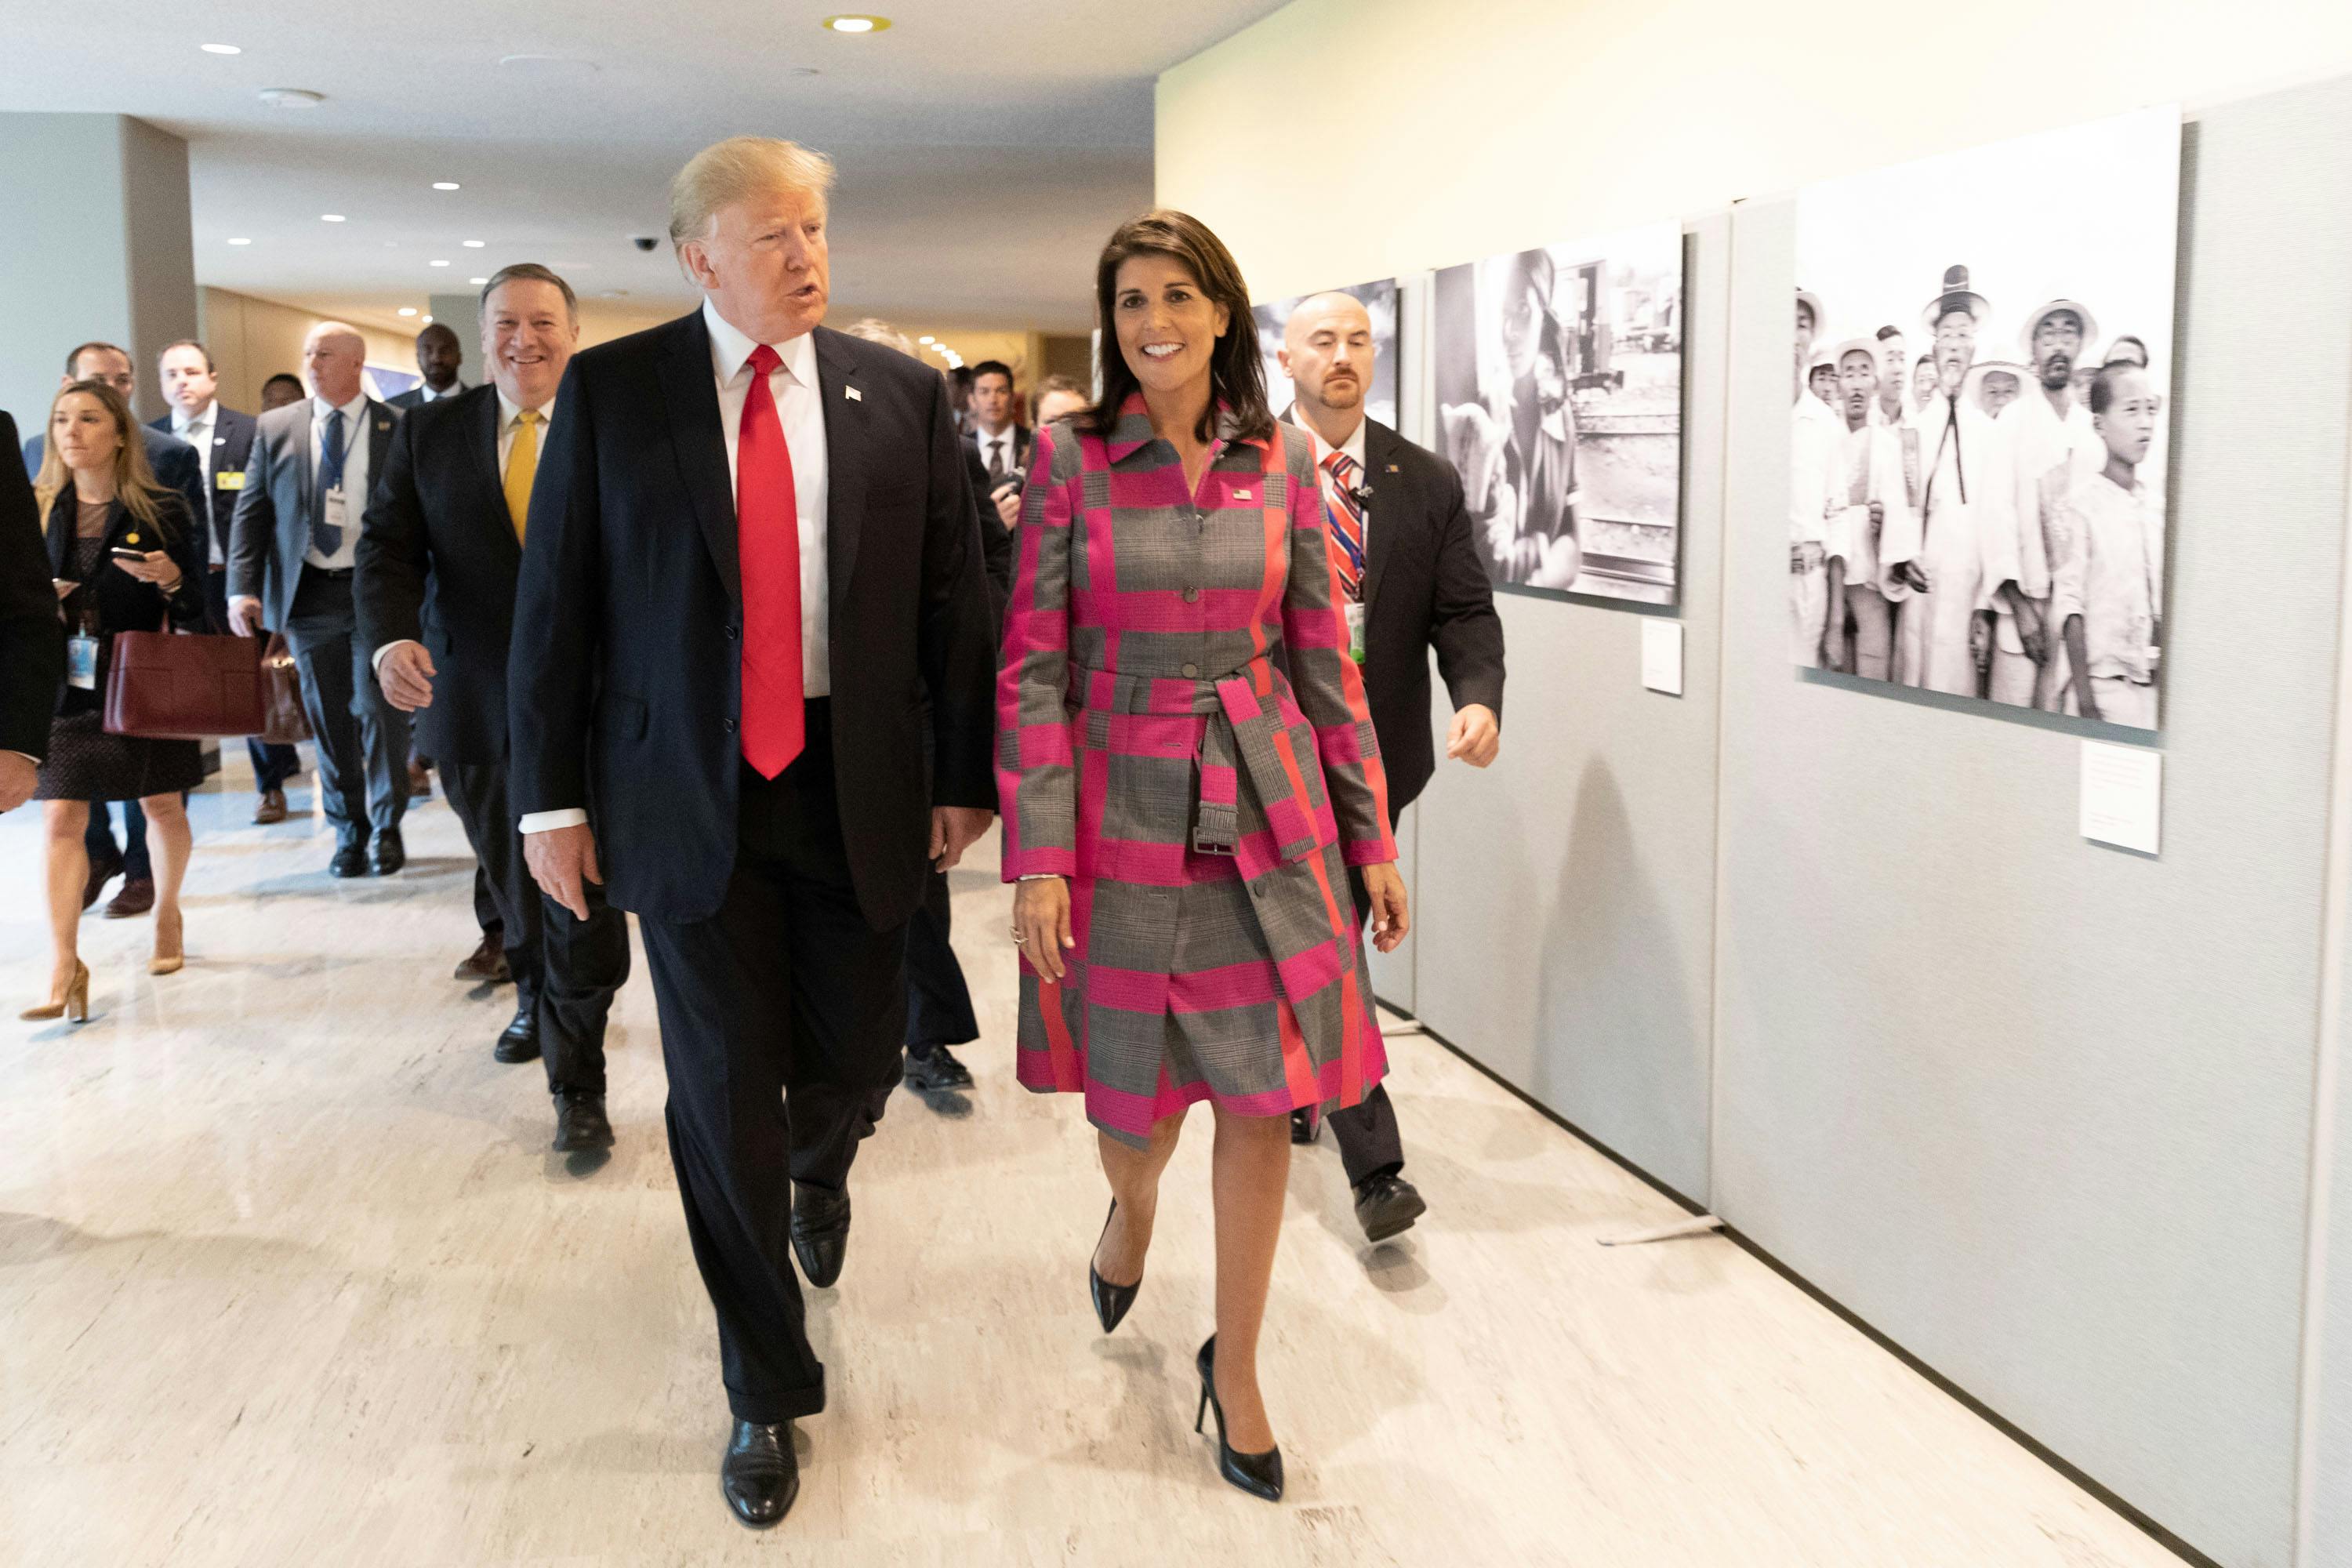 President Donald J. Trump and UN Ambassador Nikki Haley arrive Monday, Sept. 24, 2018, to the UN Headquarters in New York City, where they participated in the Global Call to Action on the World Drug Problem. (Official White House Photo by Shealah Craighead)